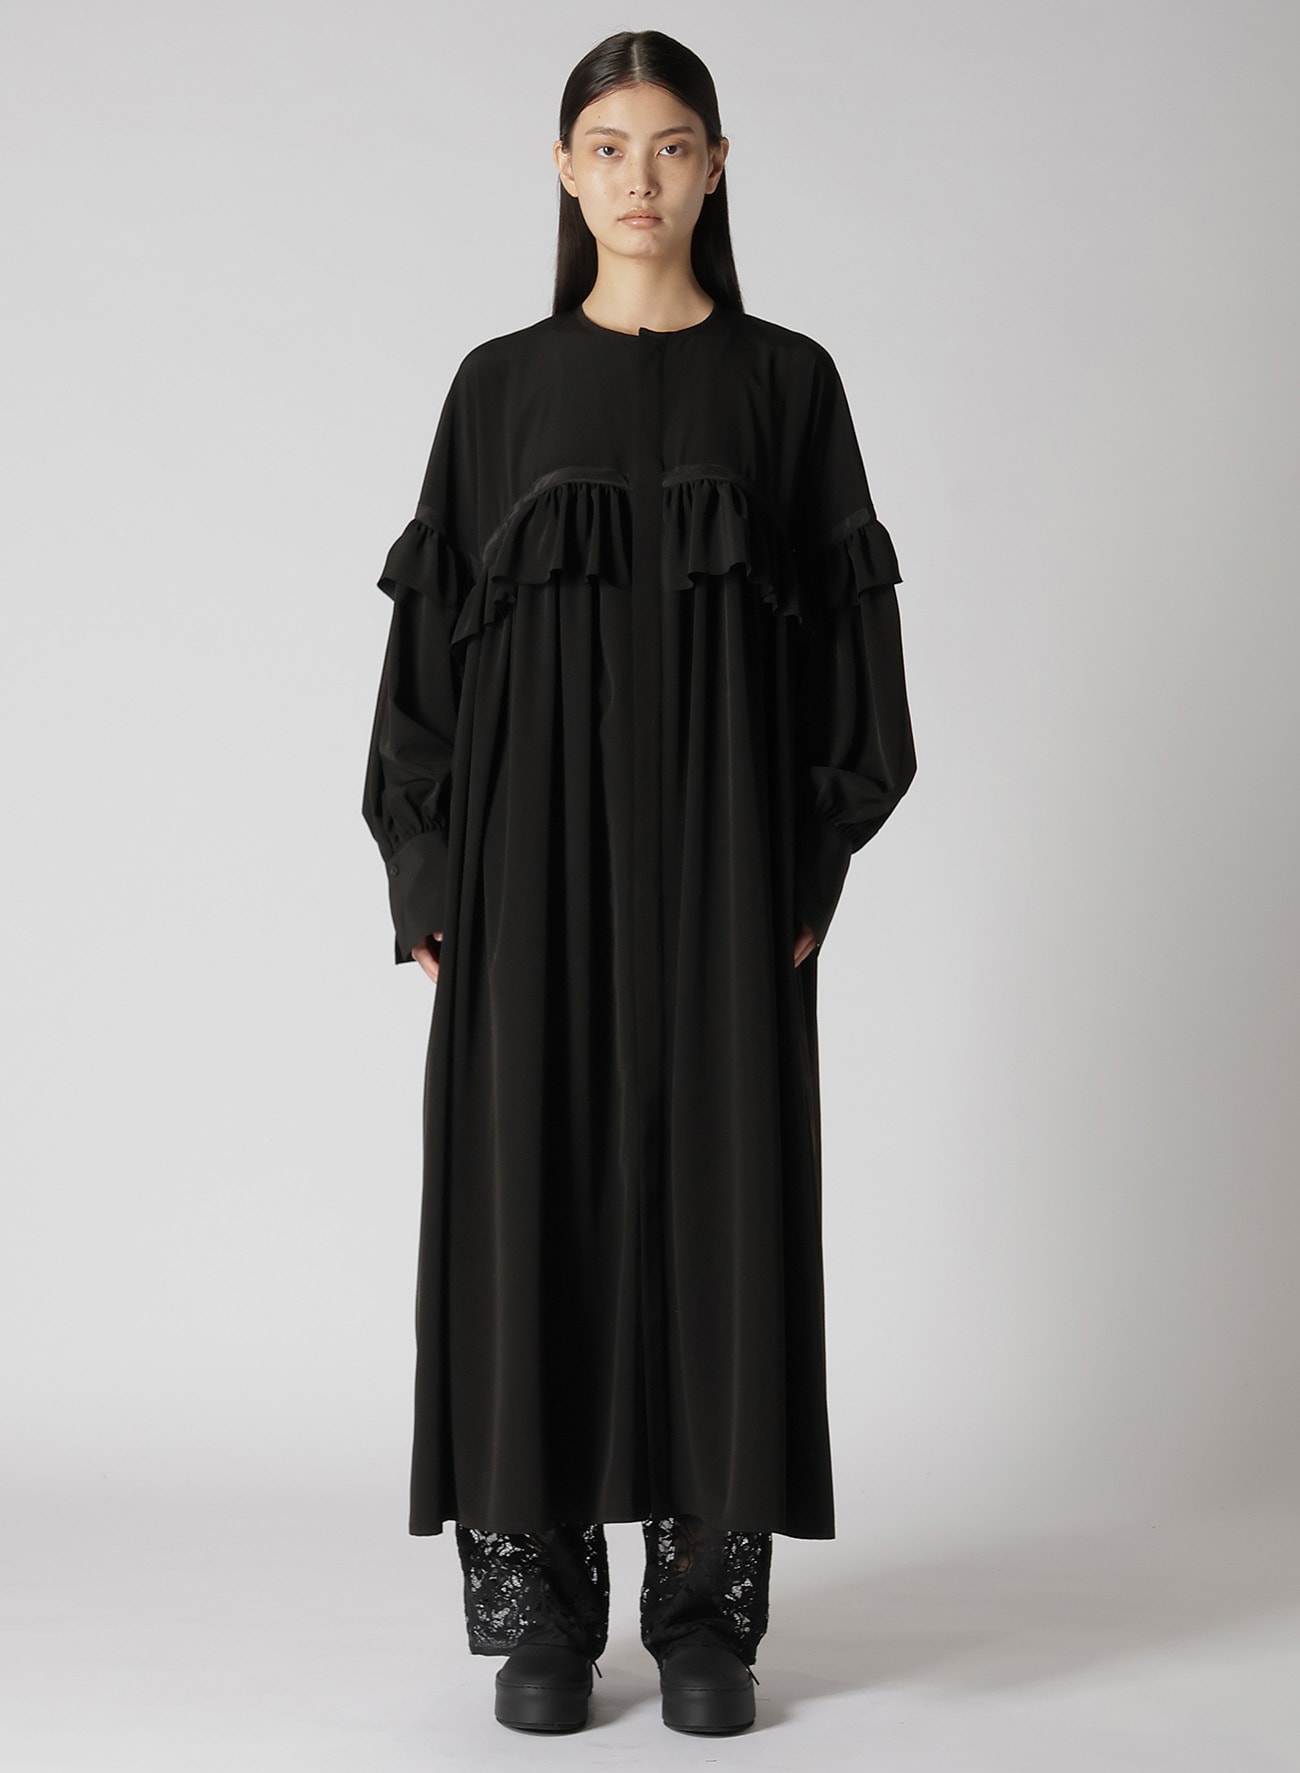 【8/7 12:00 Release】TRIACETATE/POLYESTER RUFFLED DRESS